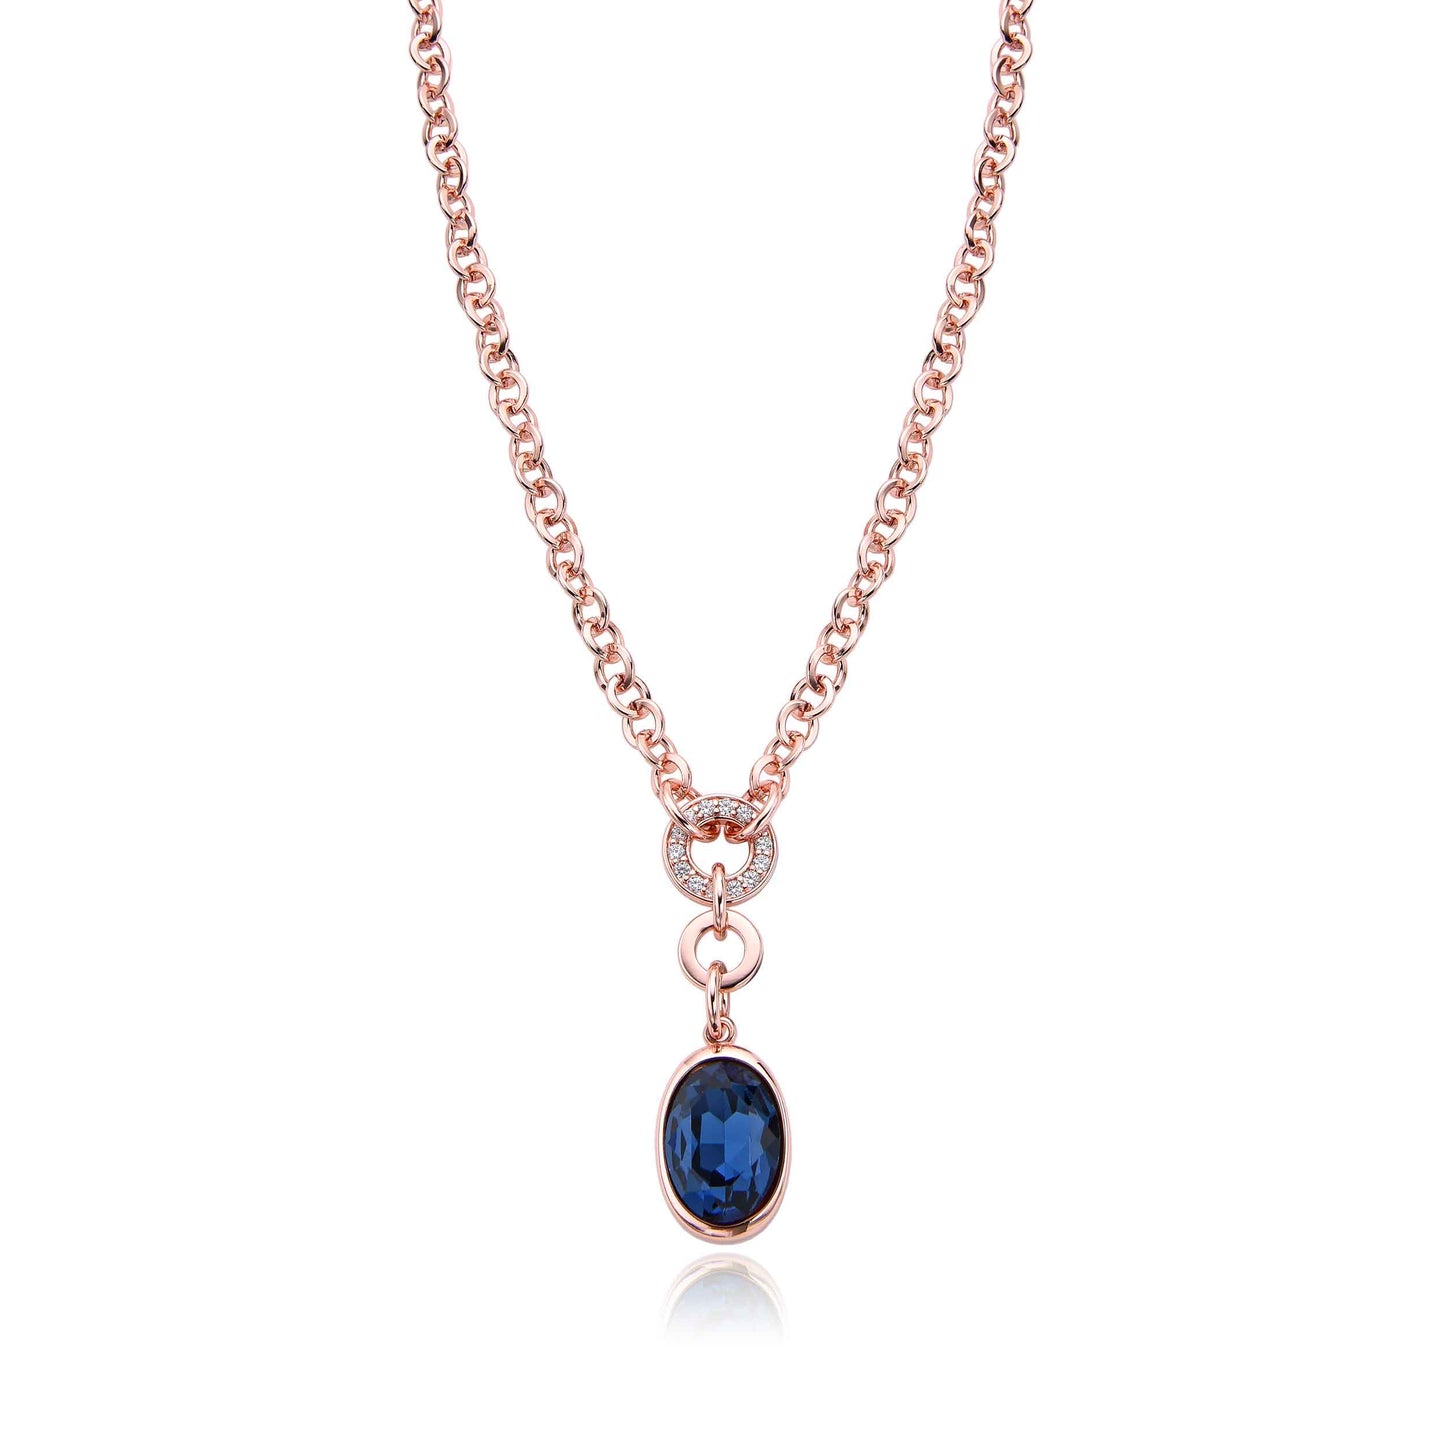 Rose Gold Necklace with Oval Sapphire & Crystal Pendant